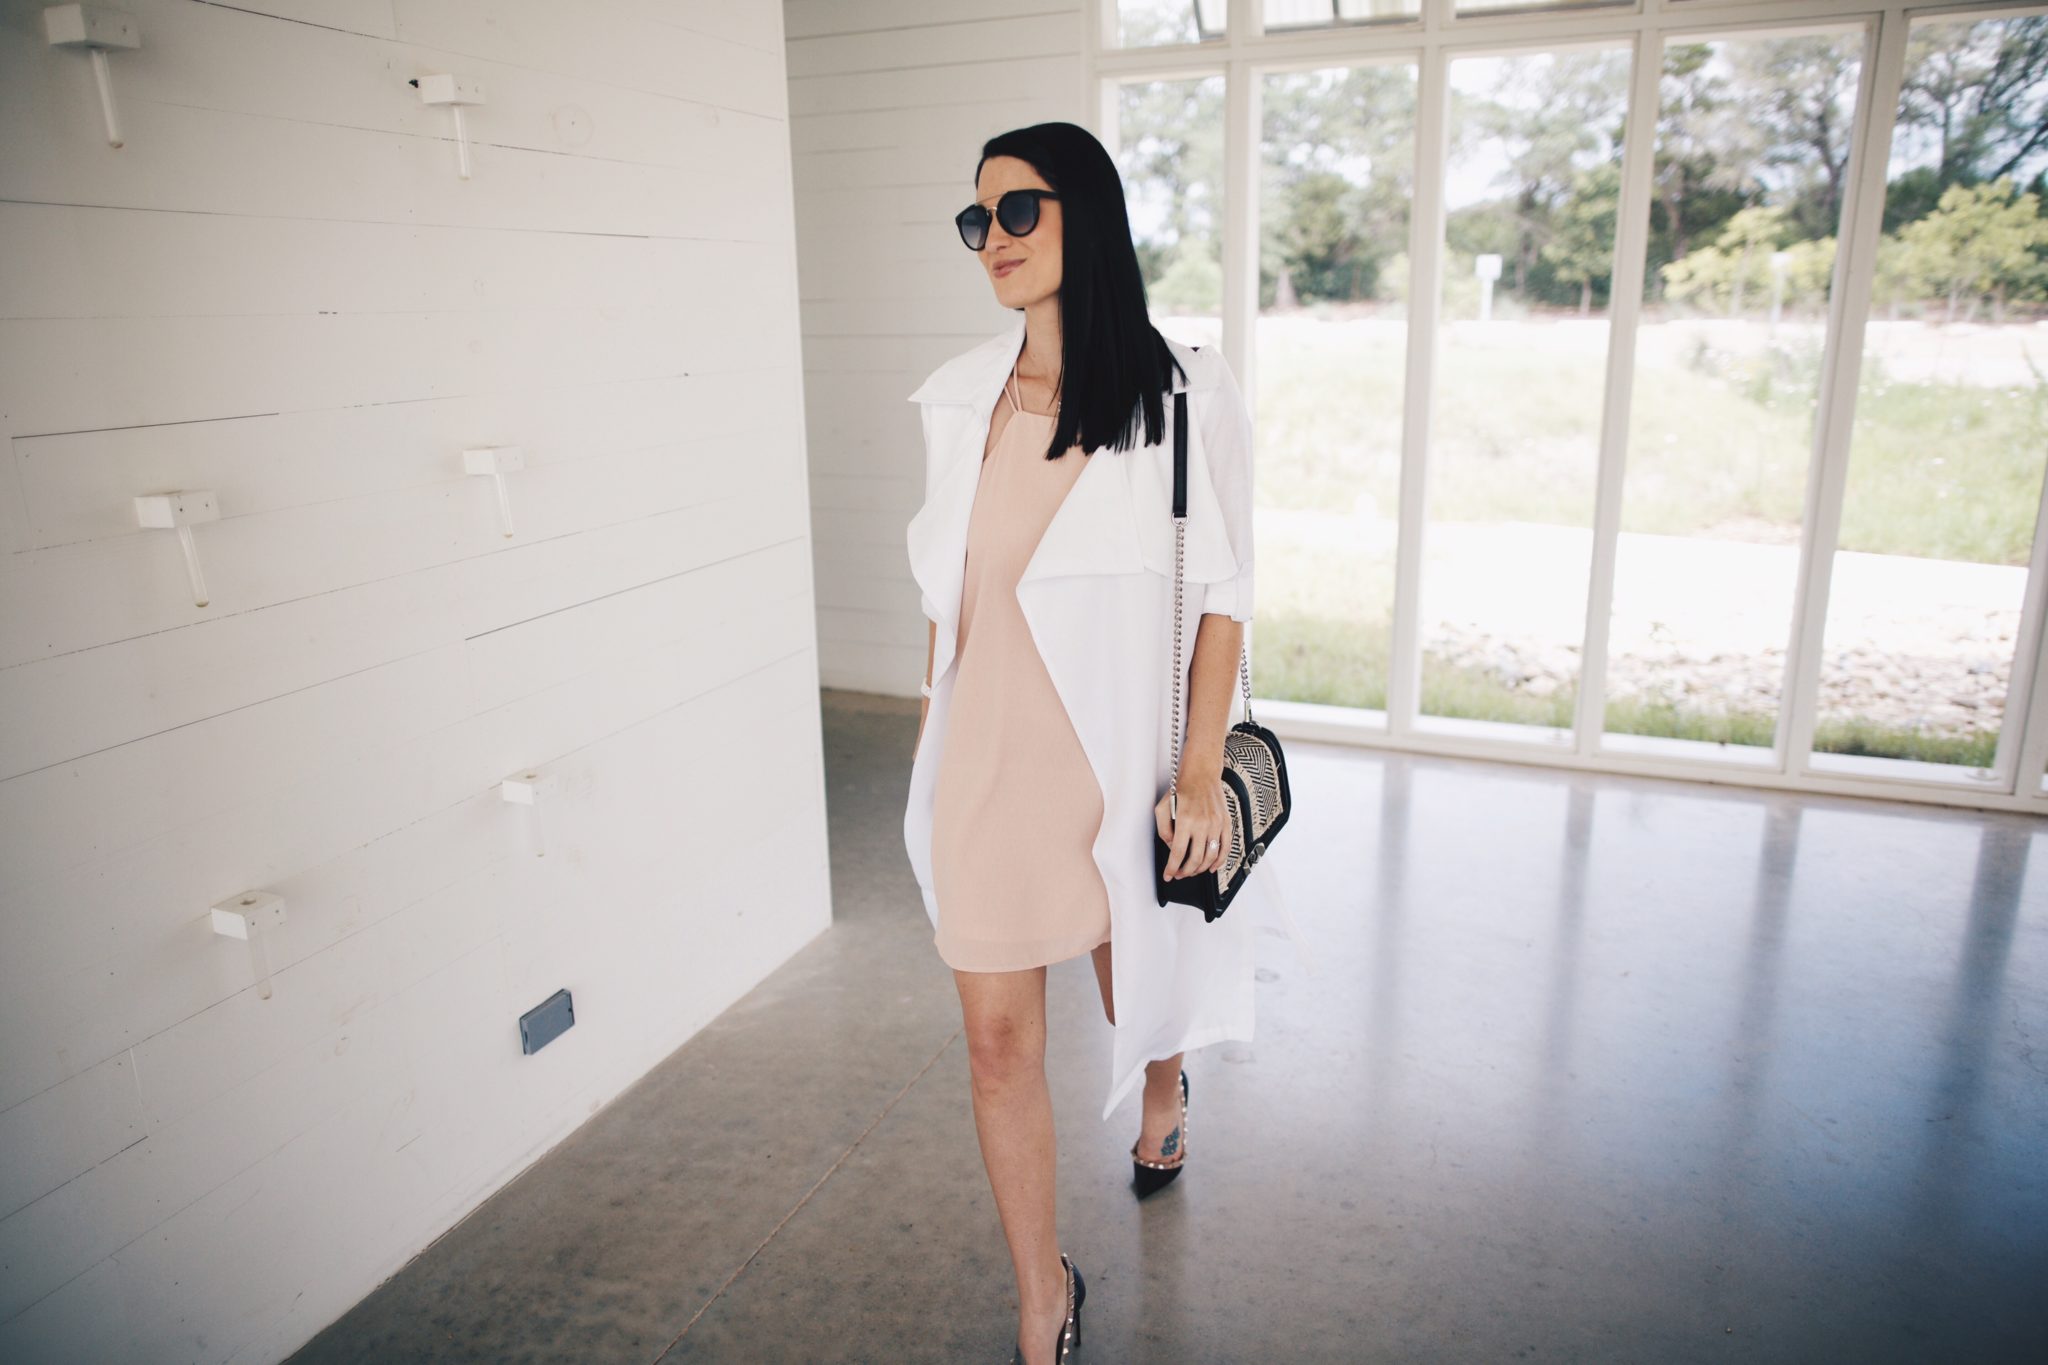 Blush Pink Dress | summer fashion tips | summer outfit ideas | summer style tips | what to wear for summer | warm weather fashion | fashion for summer | style tips for summer | outfit ideas for summer || Dressed to Kill